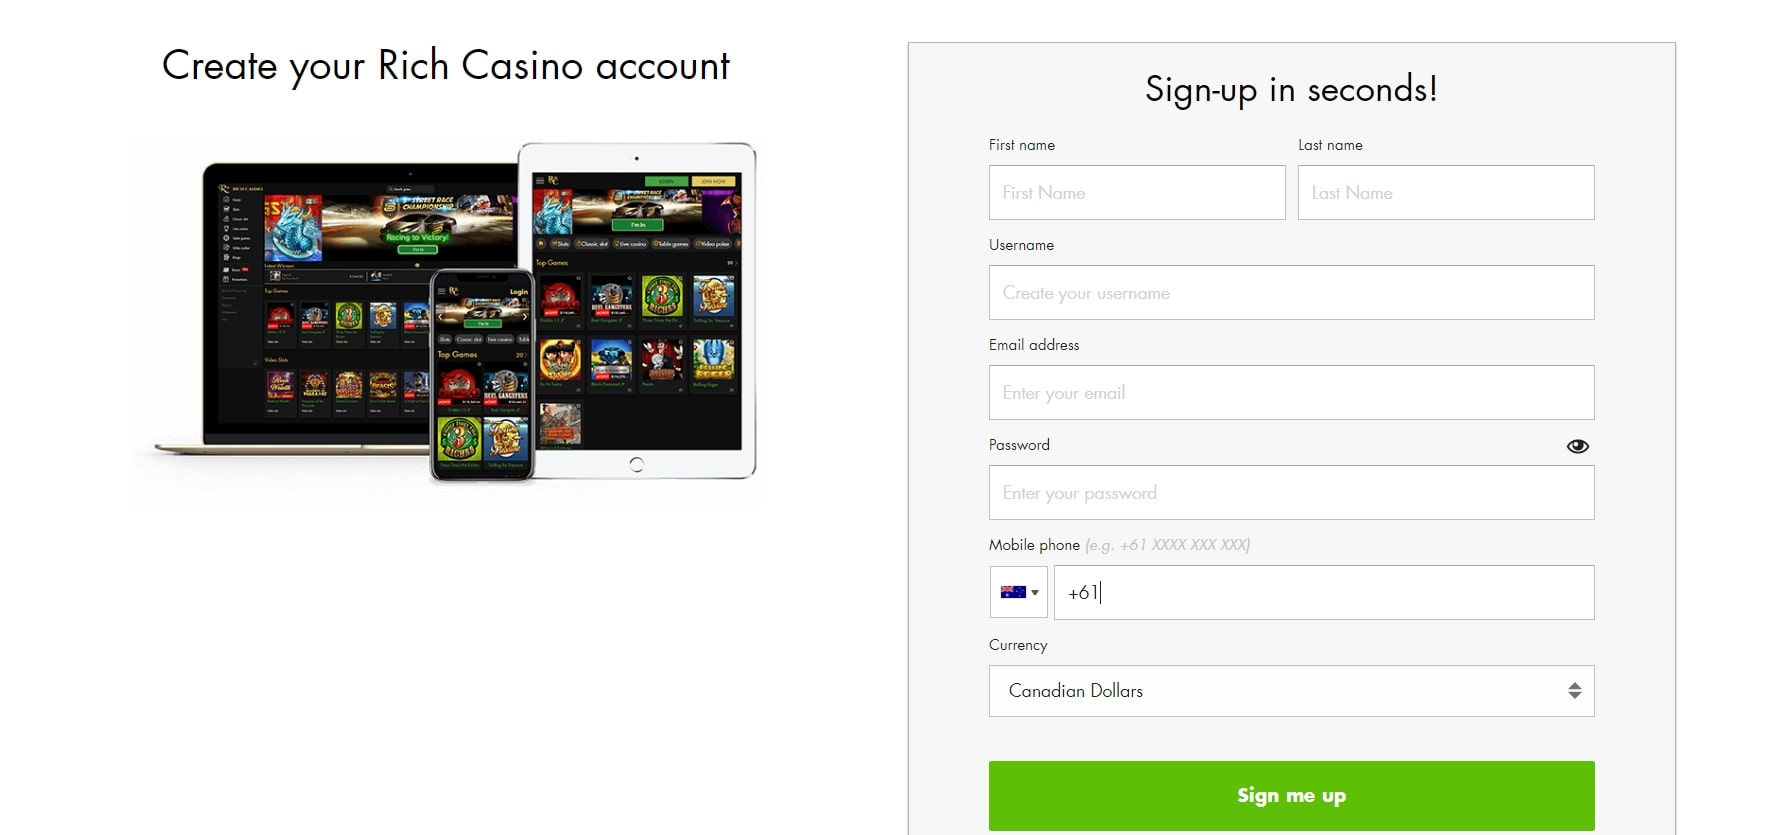 Rich Casino - Sign Up to Win Real Money Online!